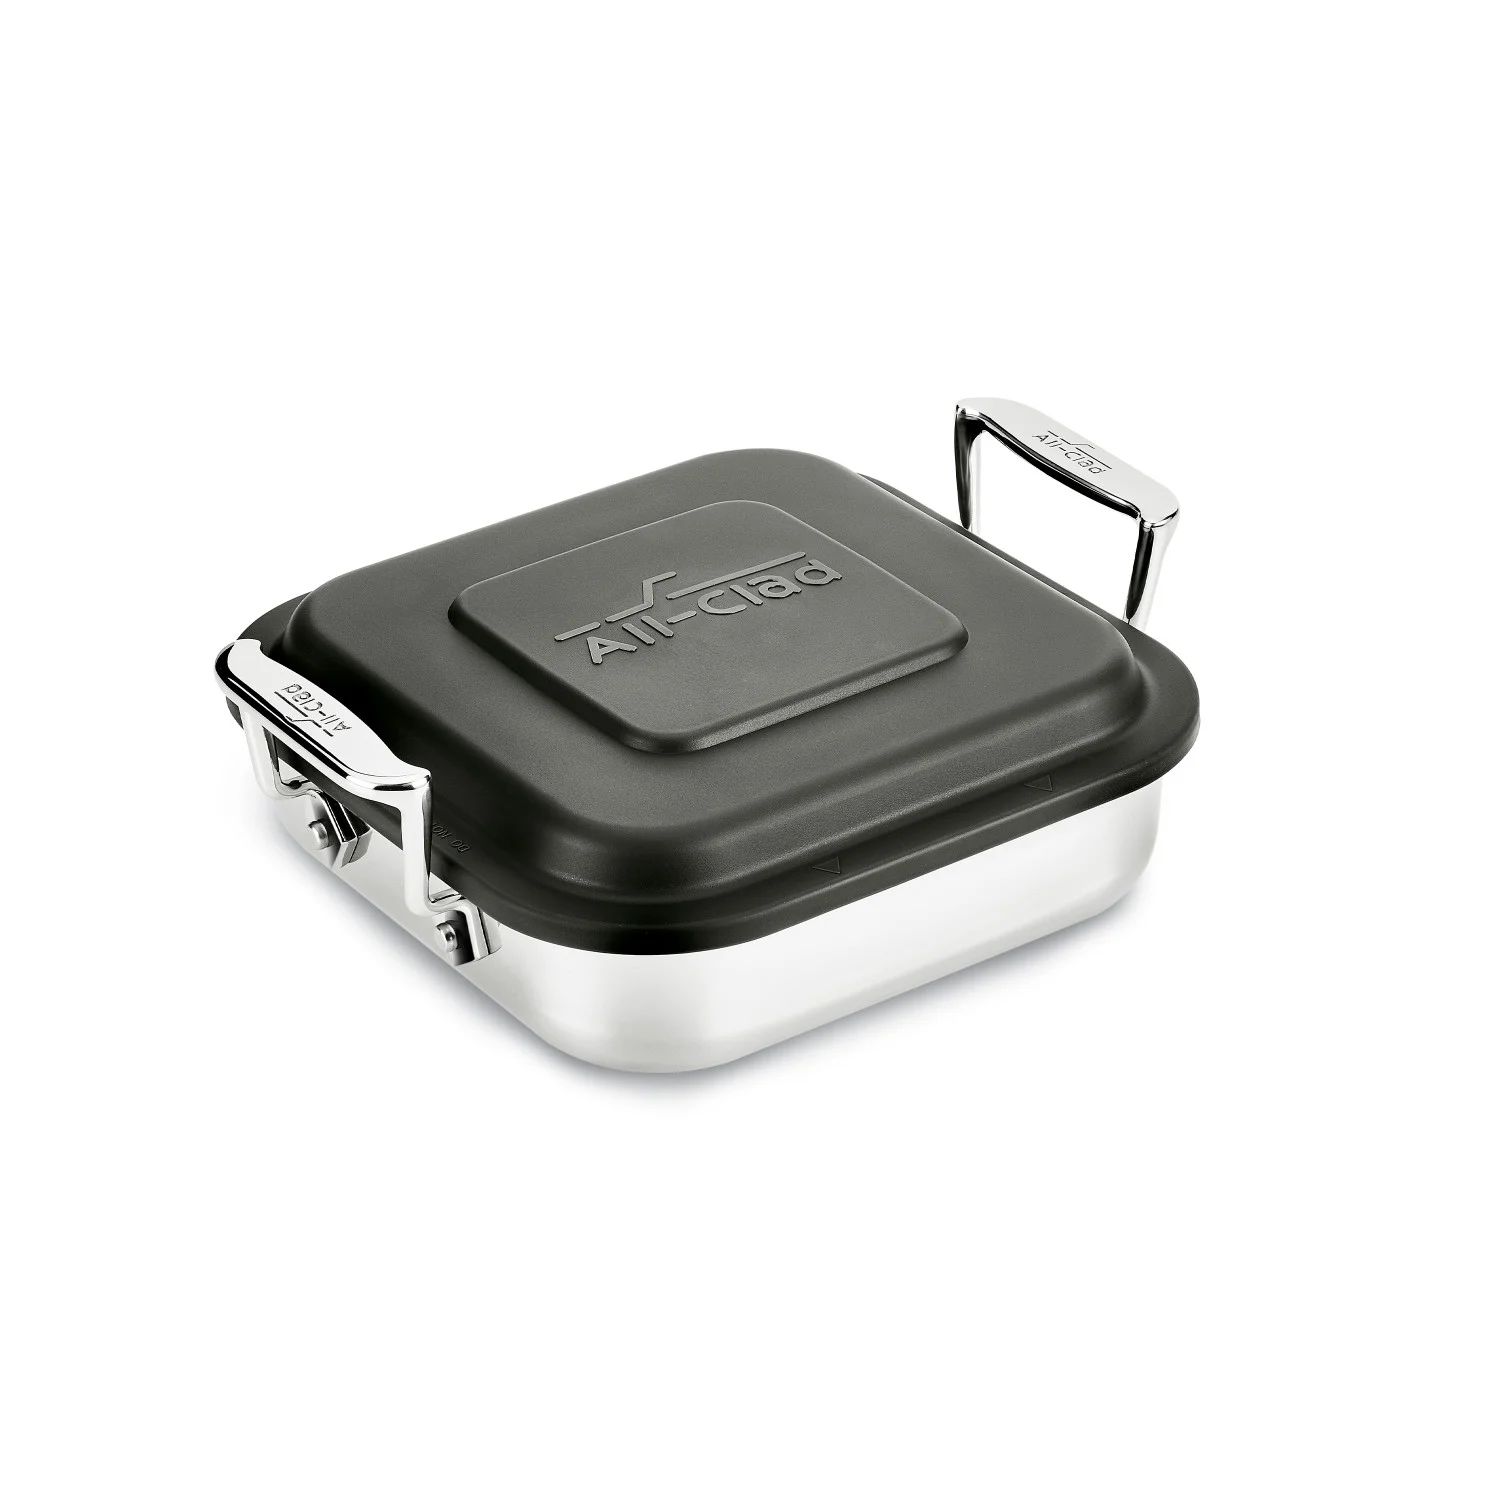 All-Clad Gourmet Accessories, Stainless Steel Square Baker with lid, 8 inch | Walmart (US)